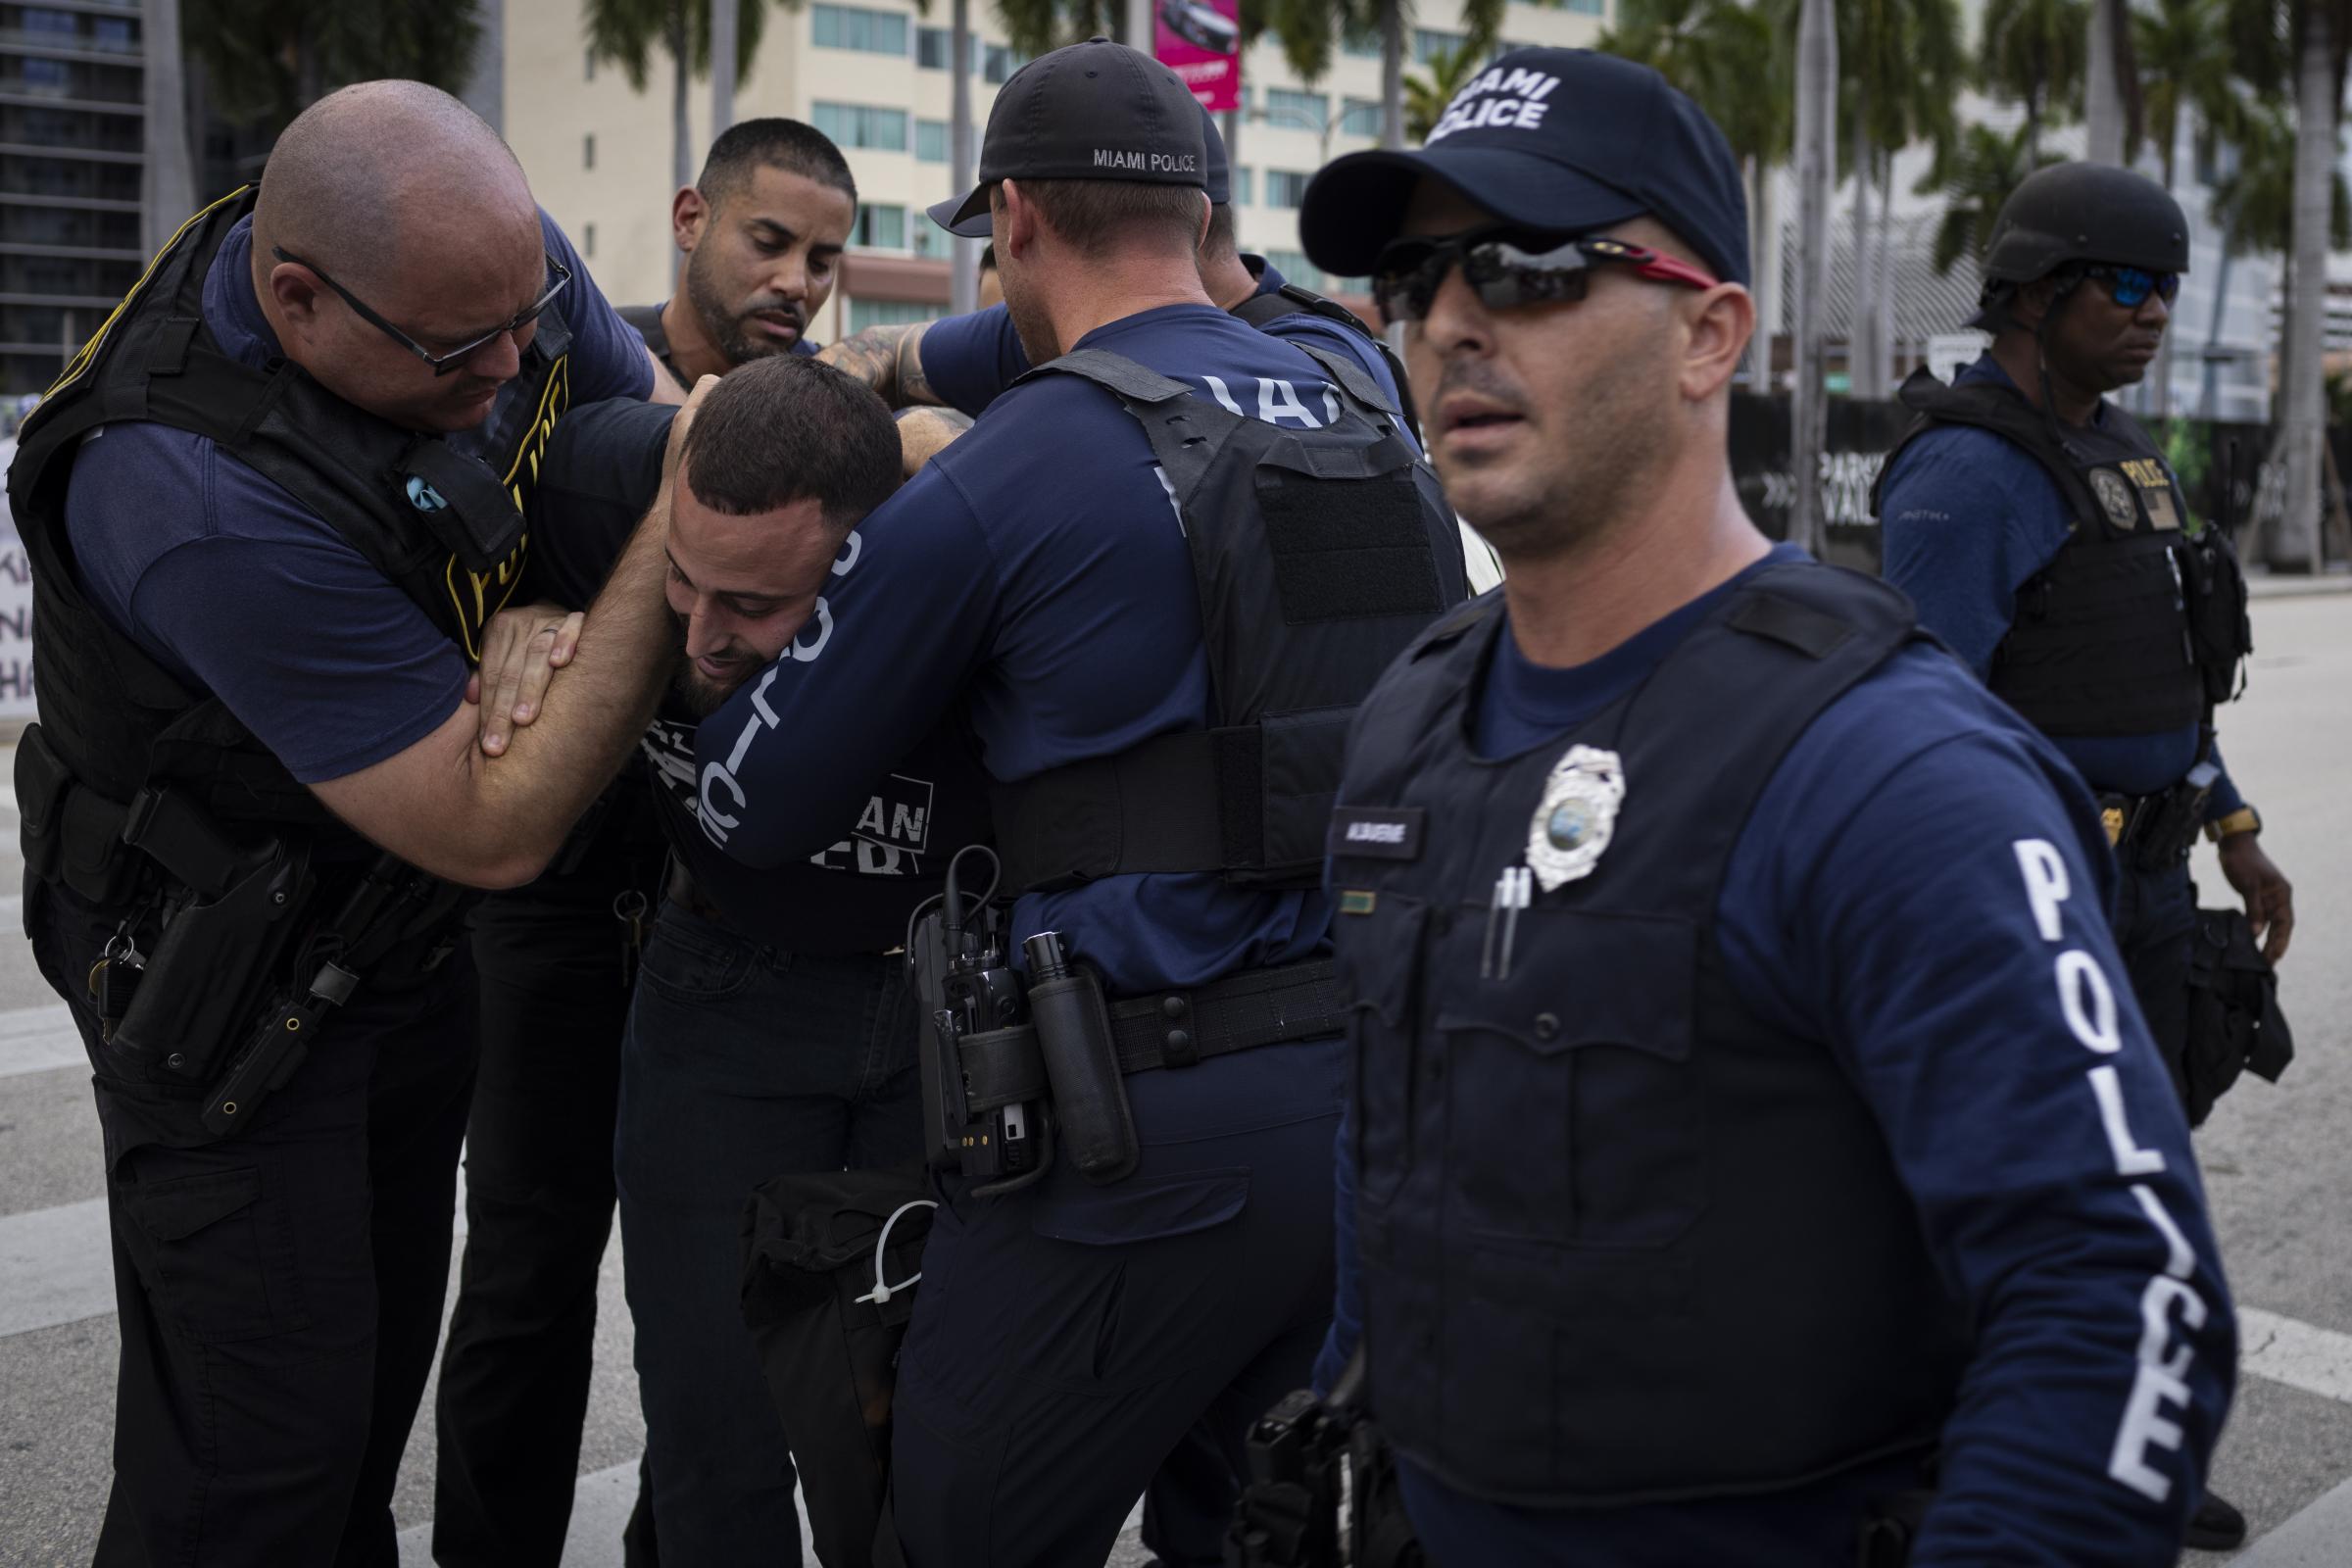 Pro-Palestine demonstration in Miami - Miami Police officers detain a demonstrator as people...